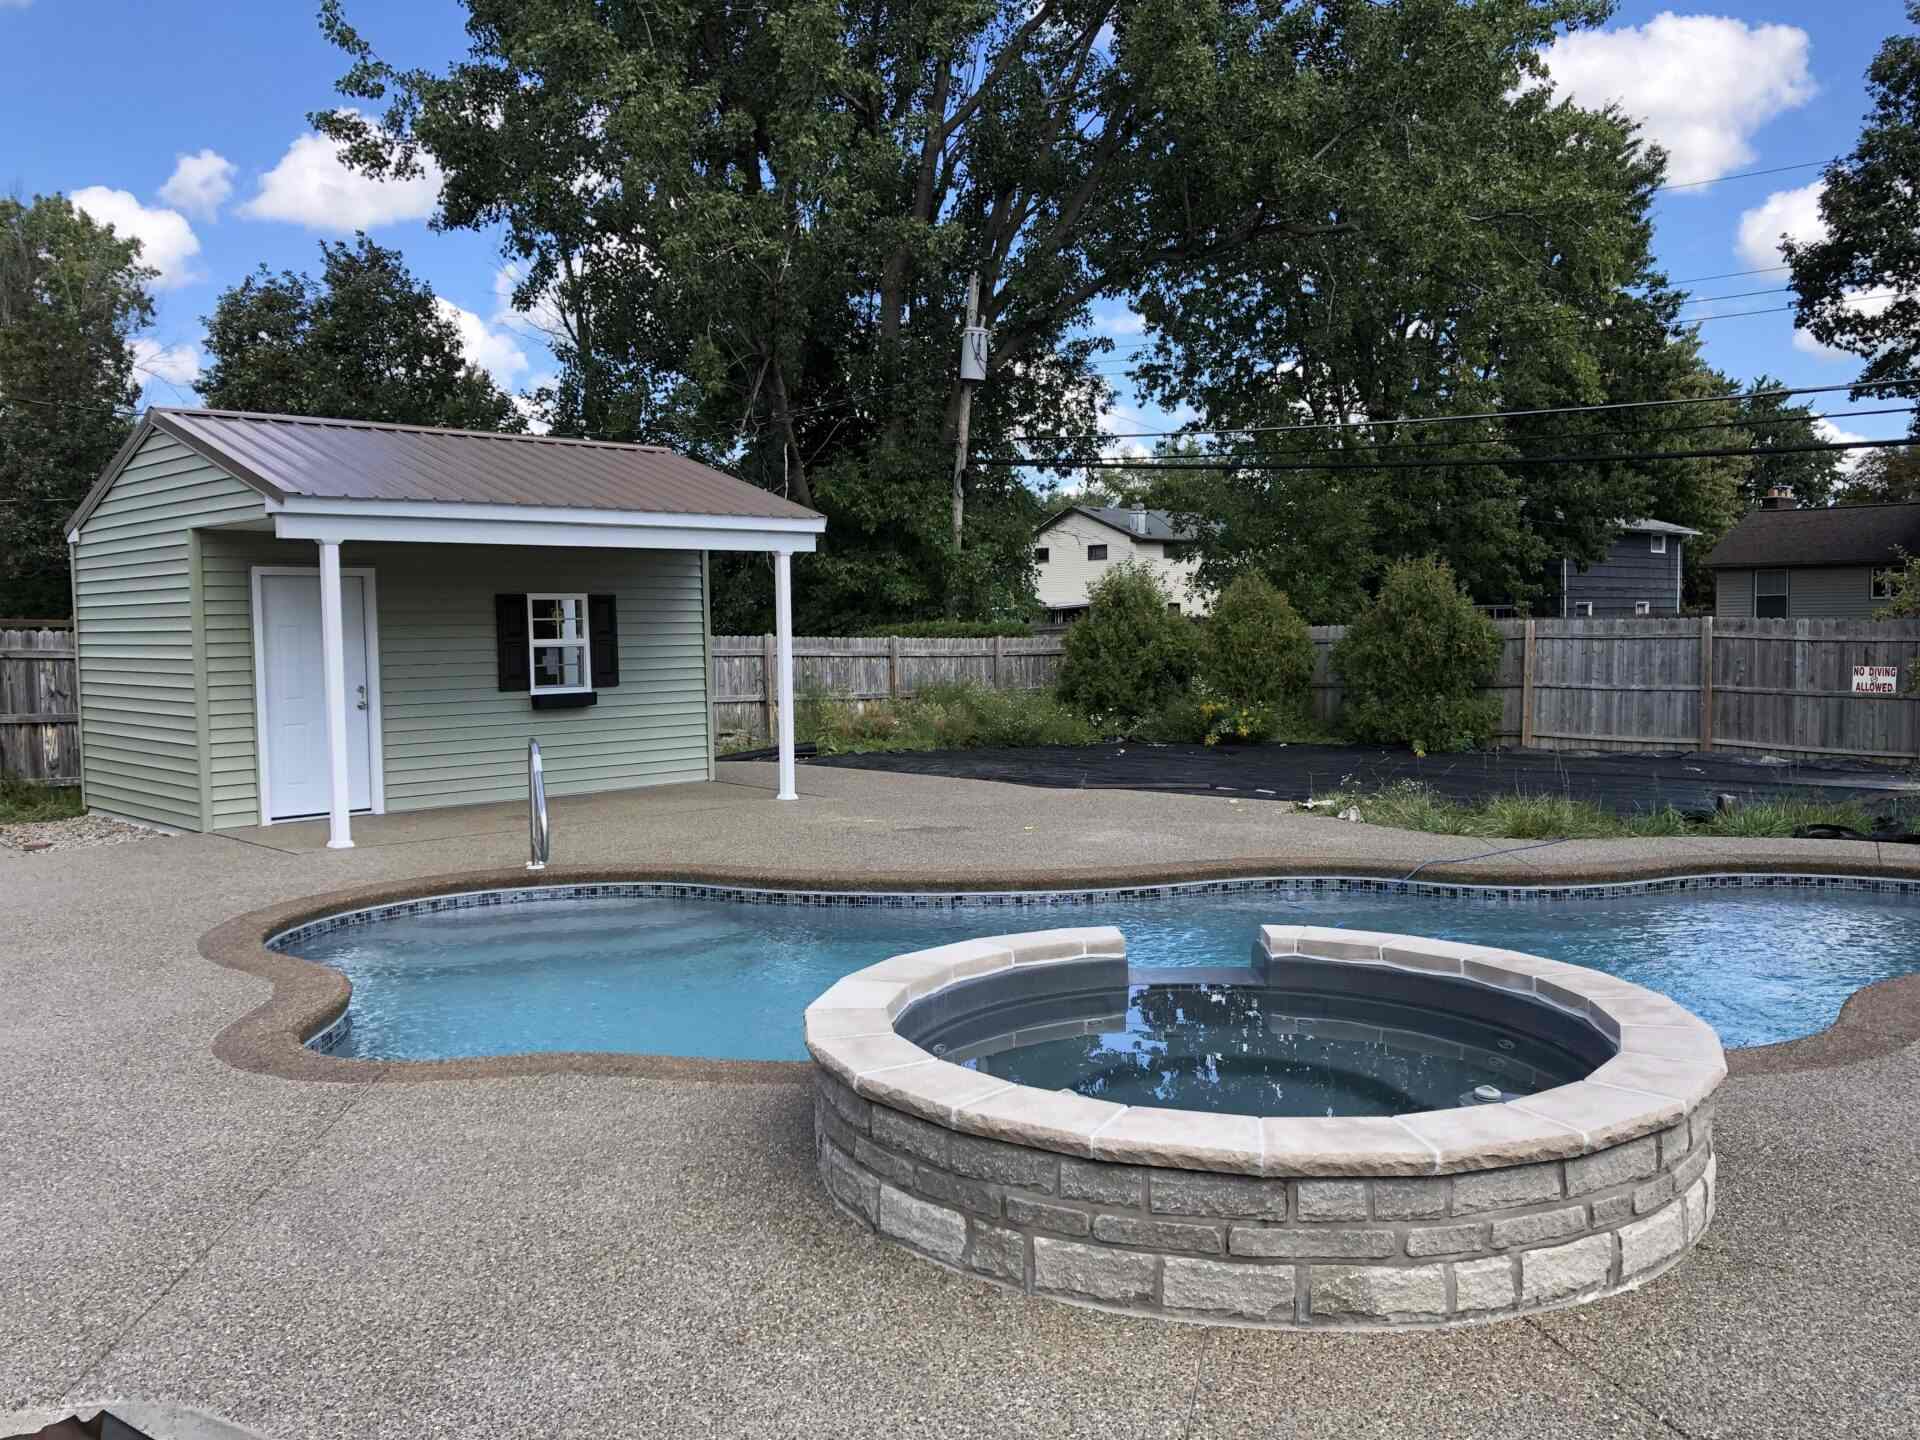 A pool with a fountain and a house in the background.